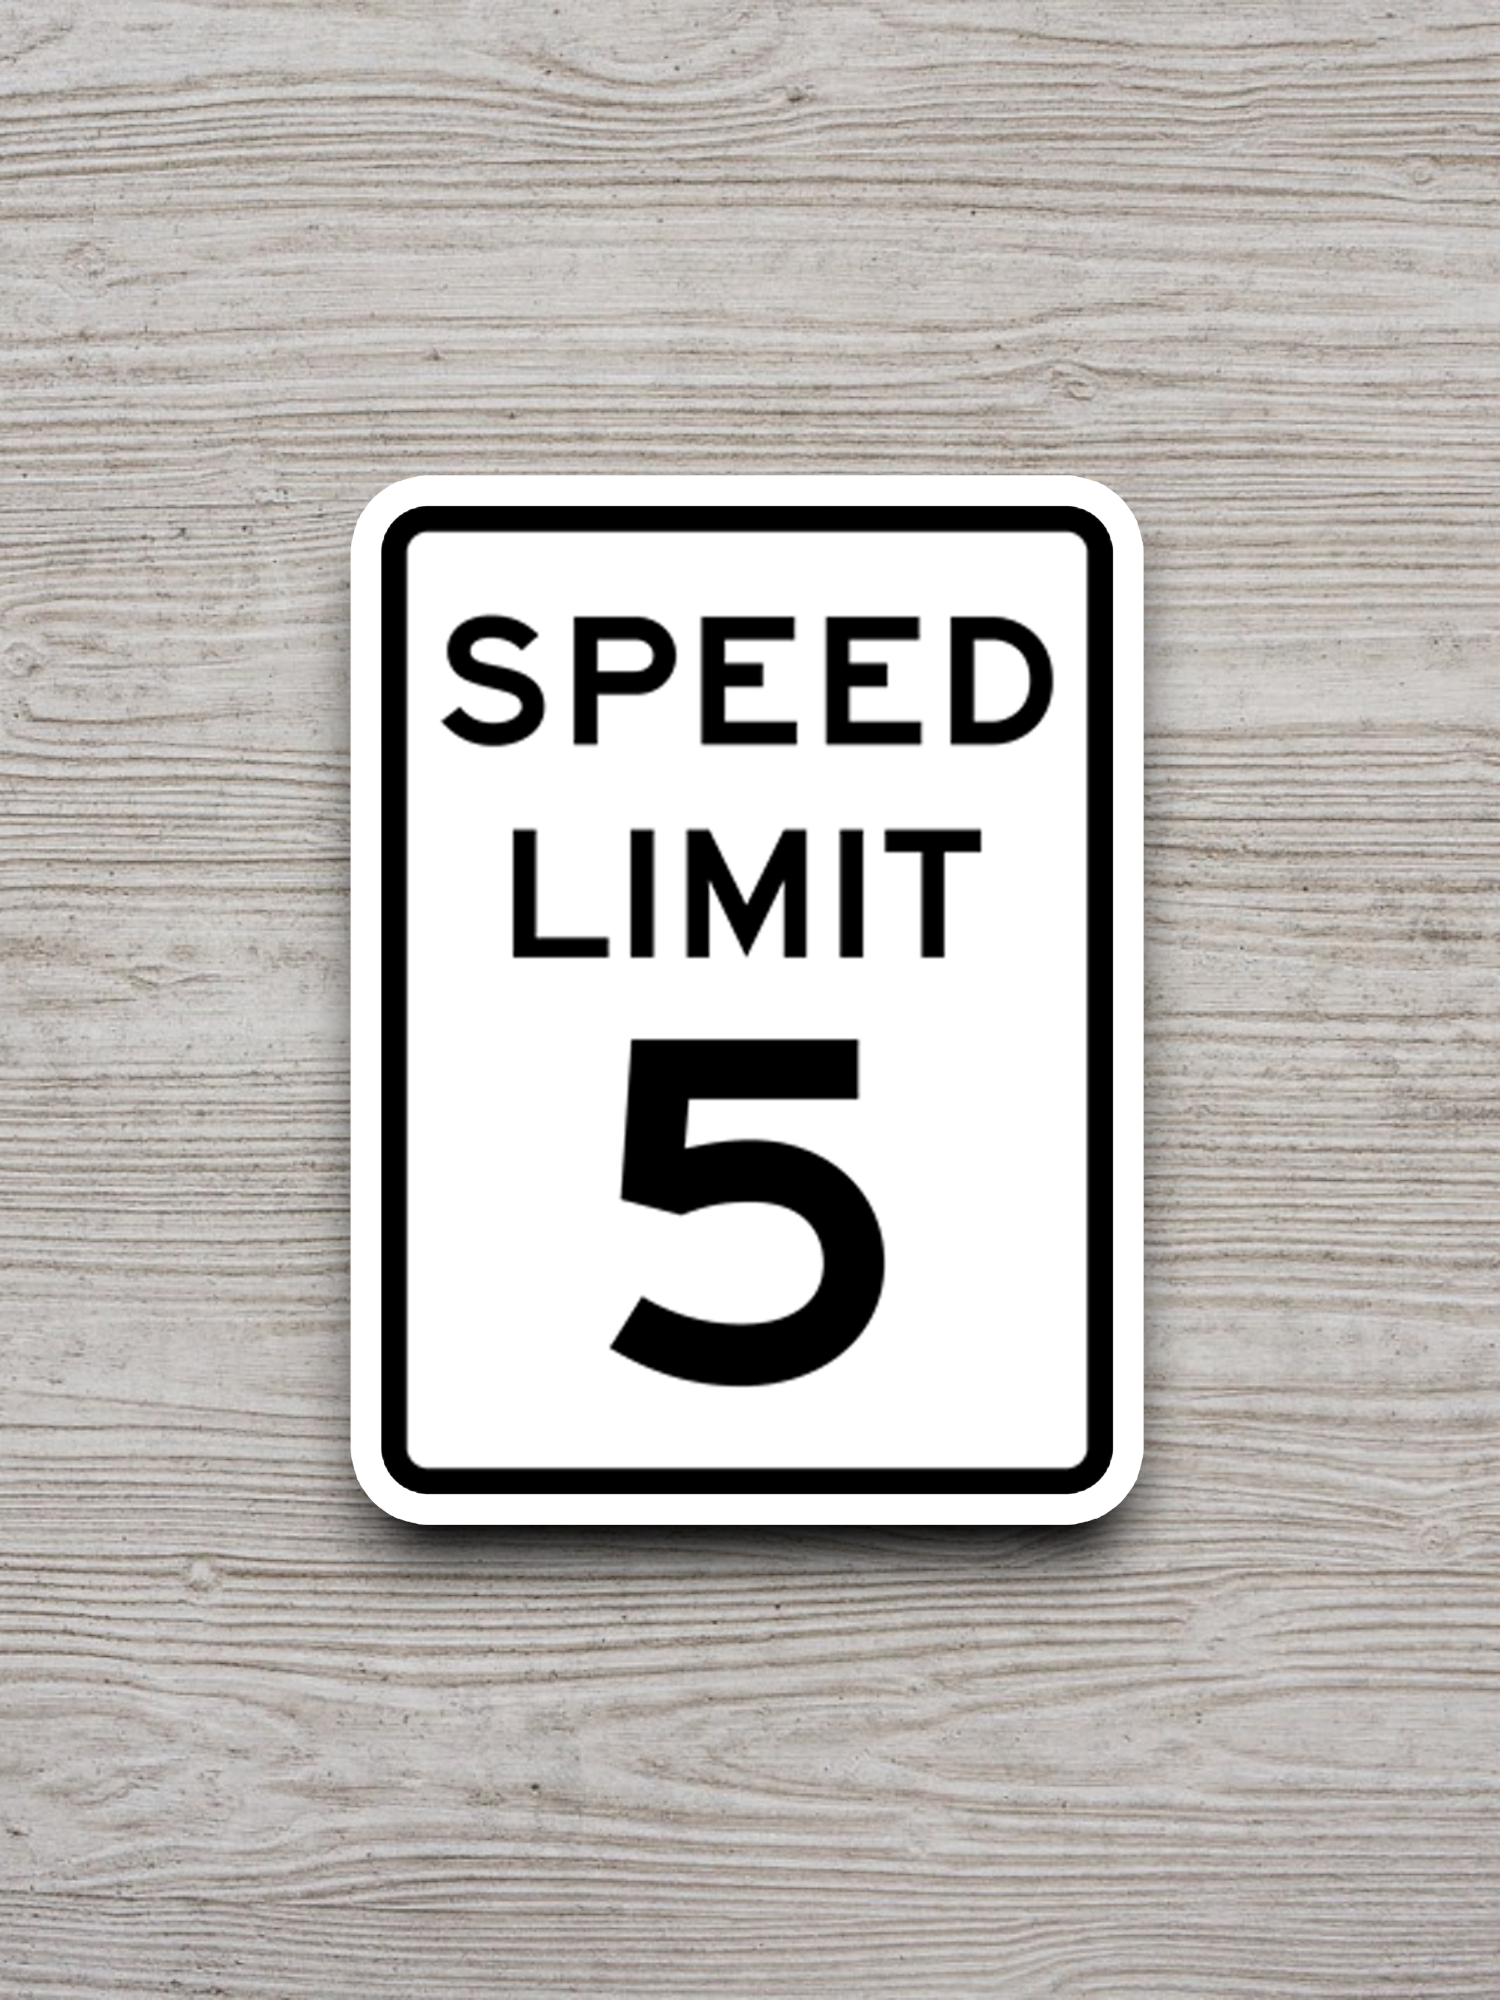 5 Miles Per Hour Speed Limit Road Sign Sticker